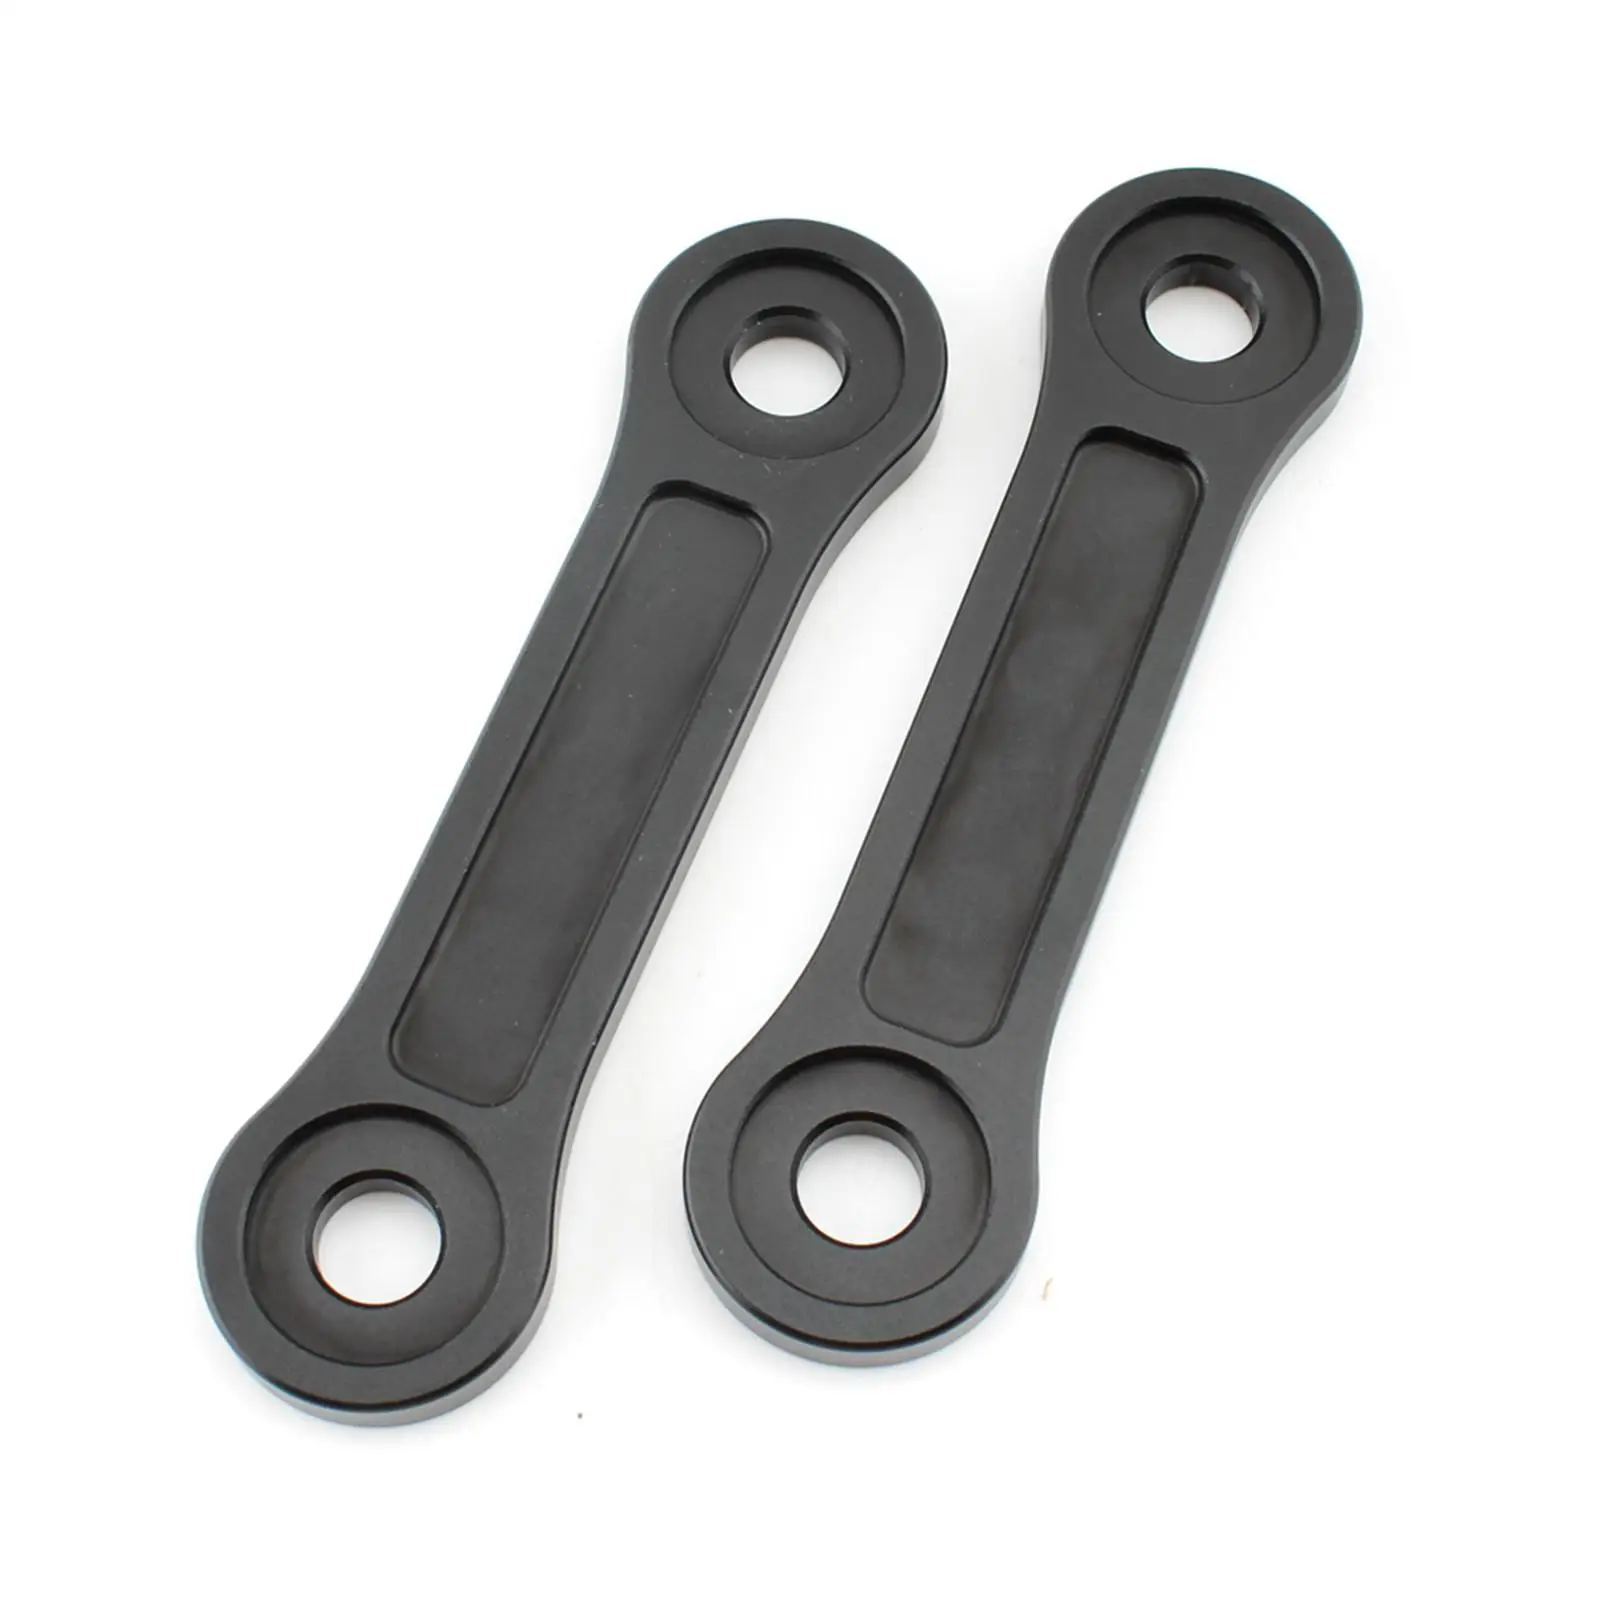 2 Pieces Motorcycle Rear Lowering Kit Dog Bones Linkages for Tiger1200